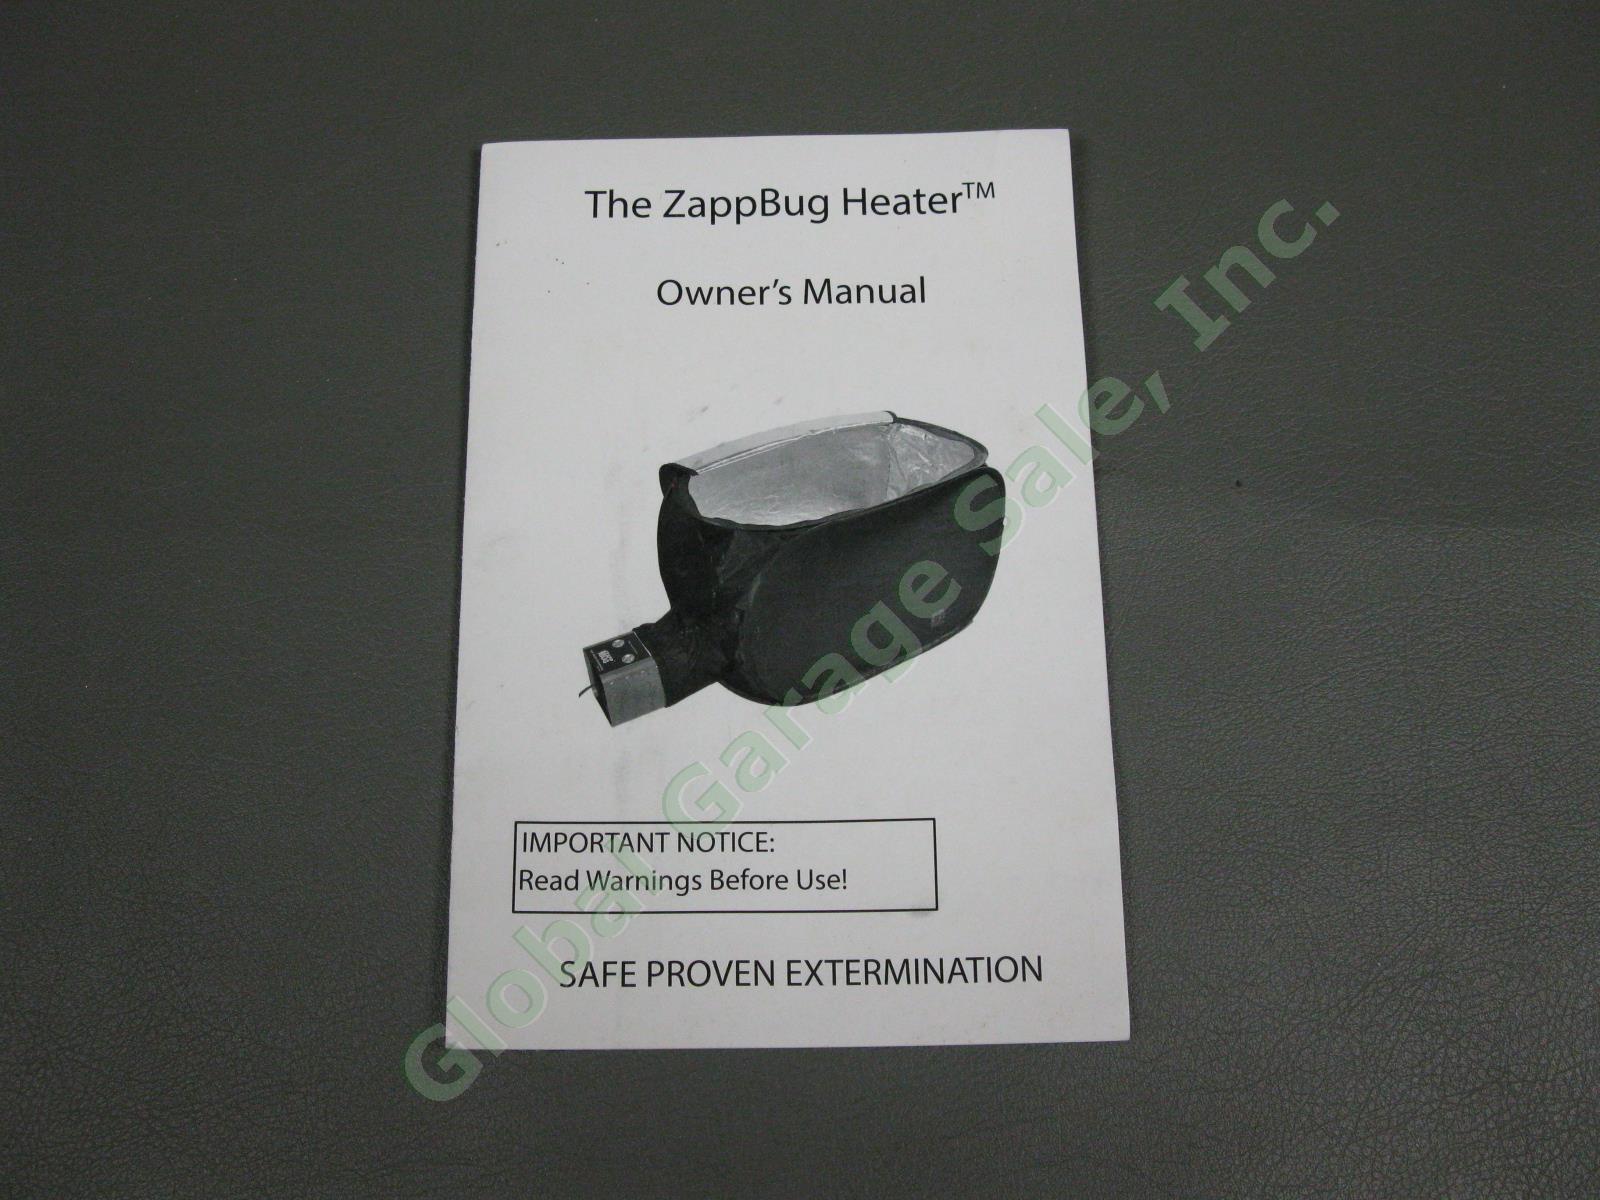 NEW ZappBug Heater Electric Bed Bug Killer Corded Home Insect Pest Control NIB 10